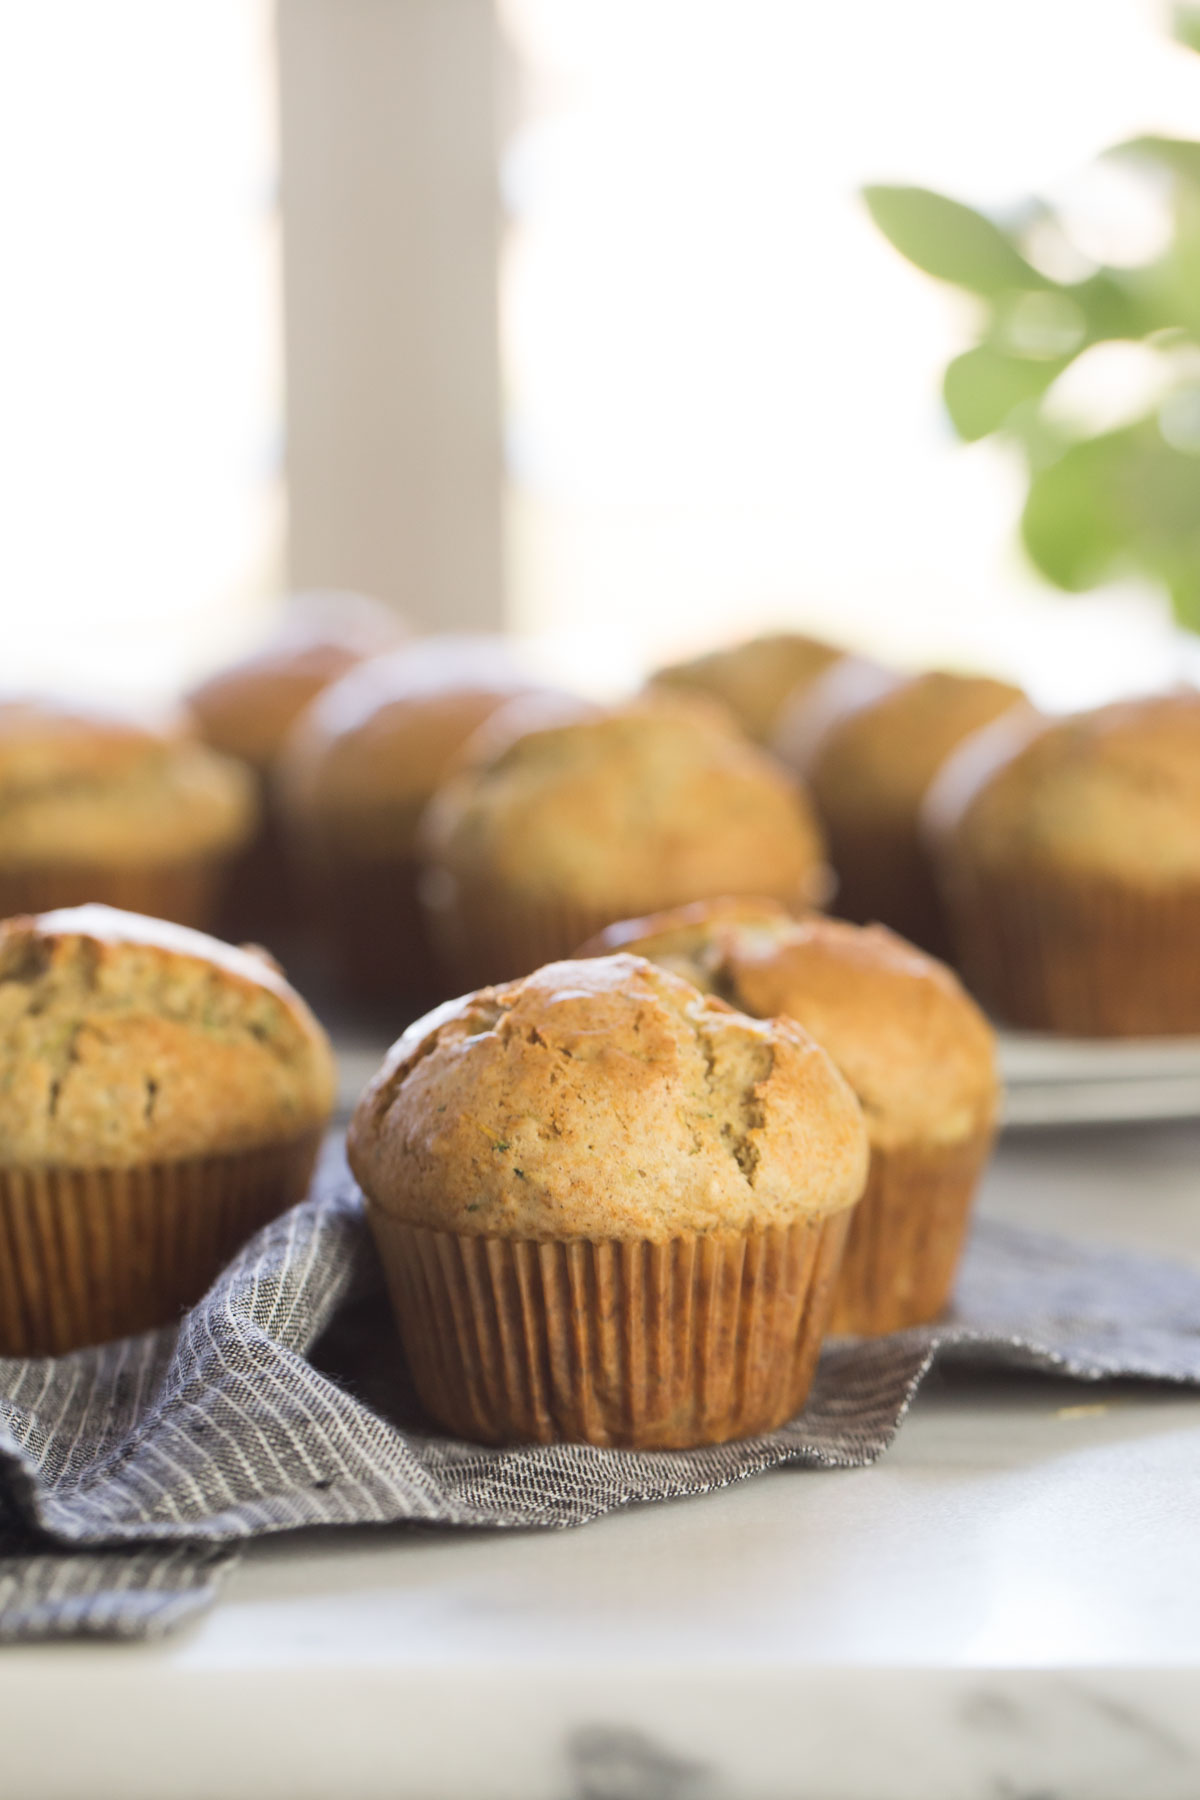 Three Healthier Zucchini Muffins on a cloth napkin, with more muffins in the background. 